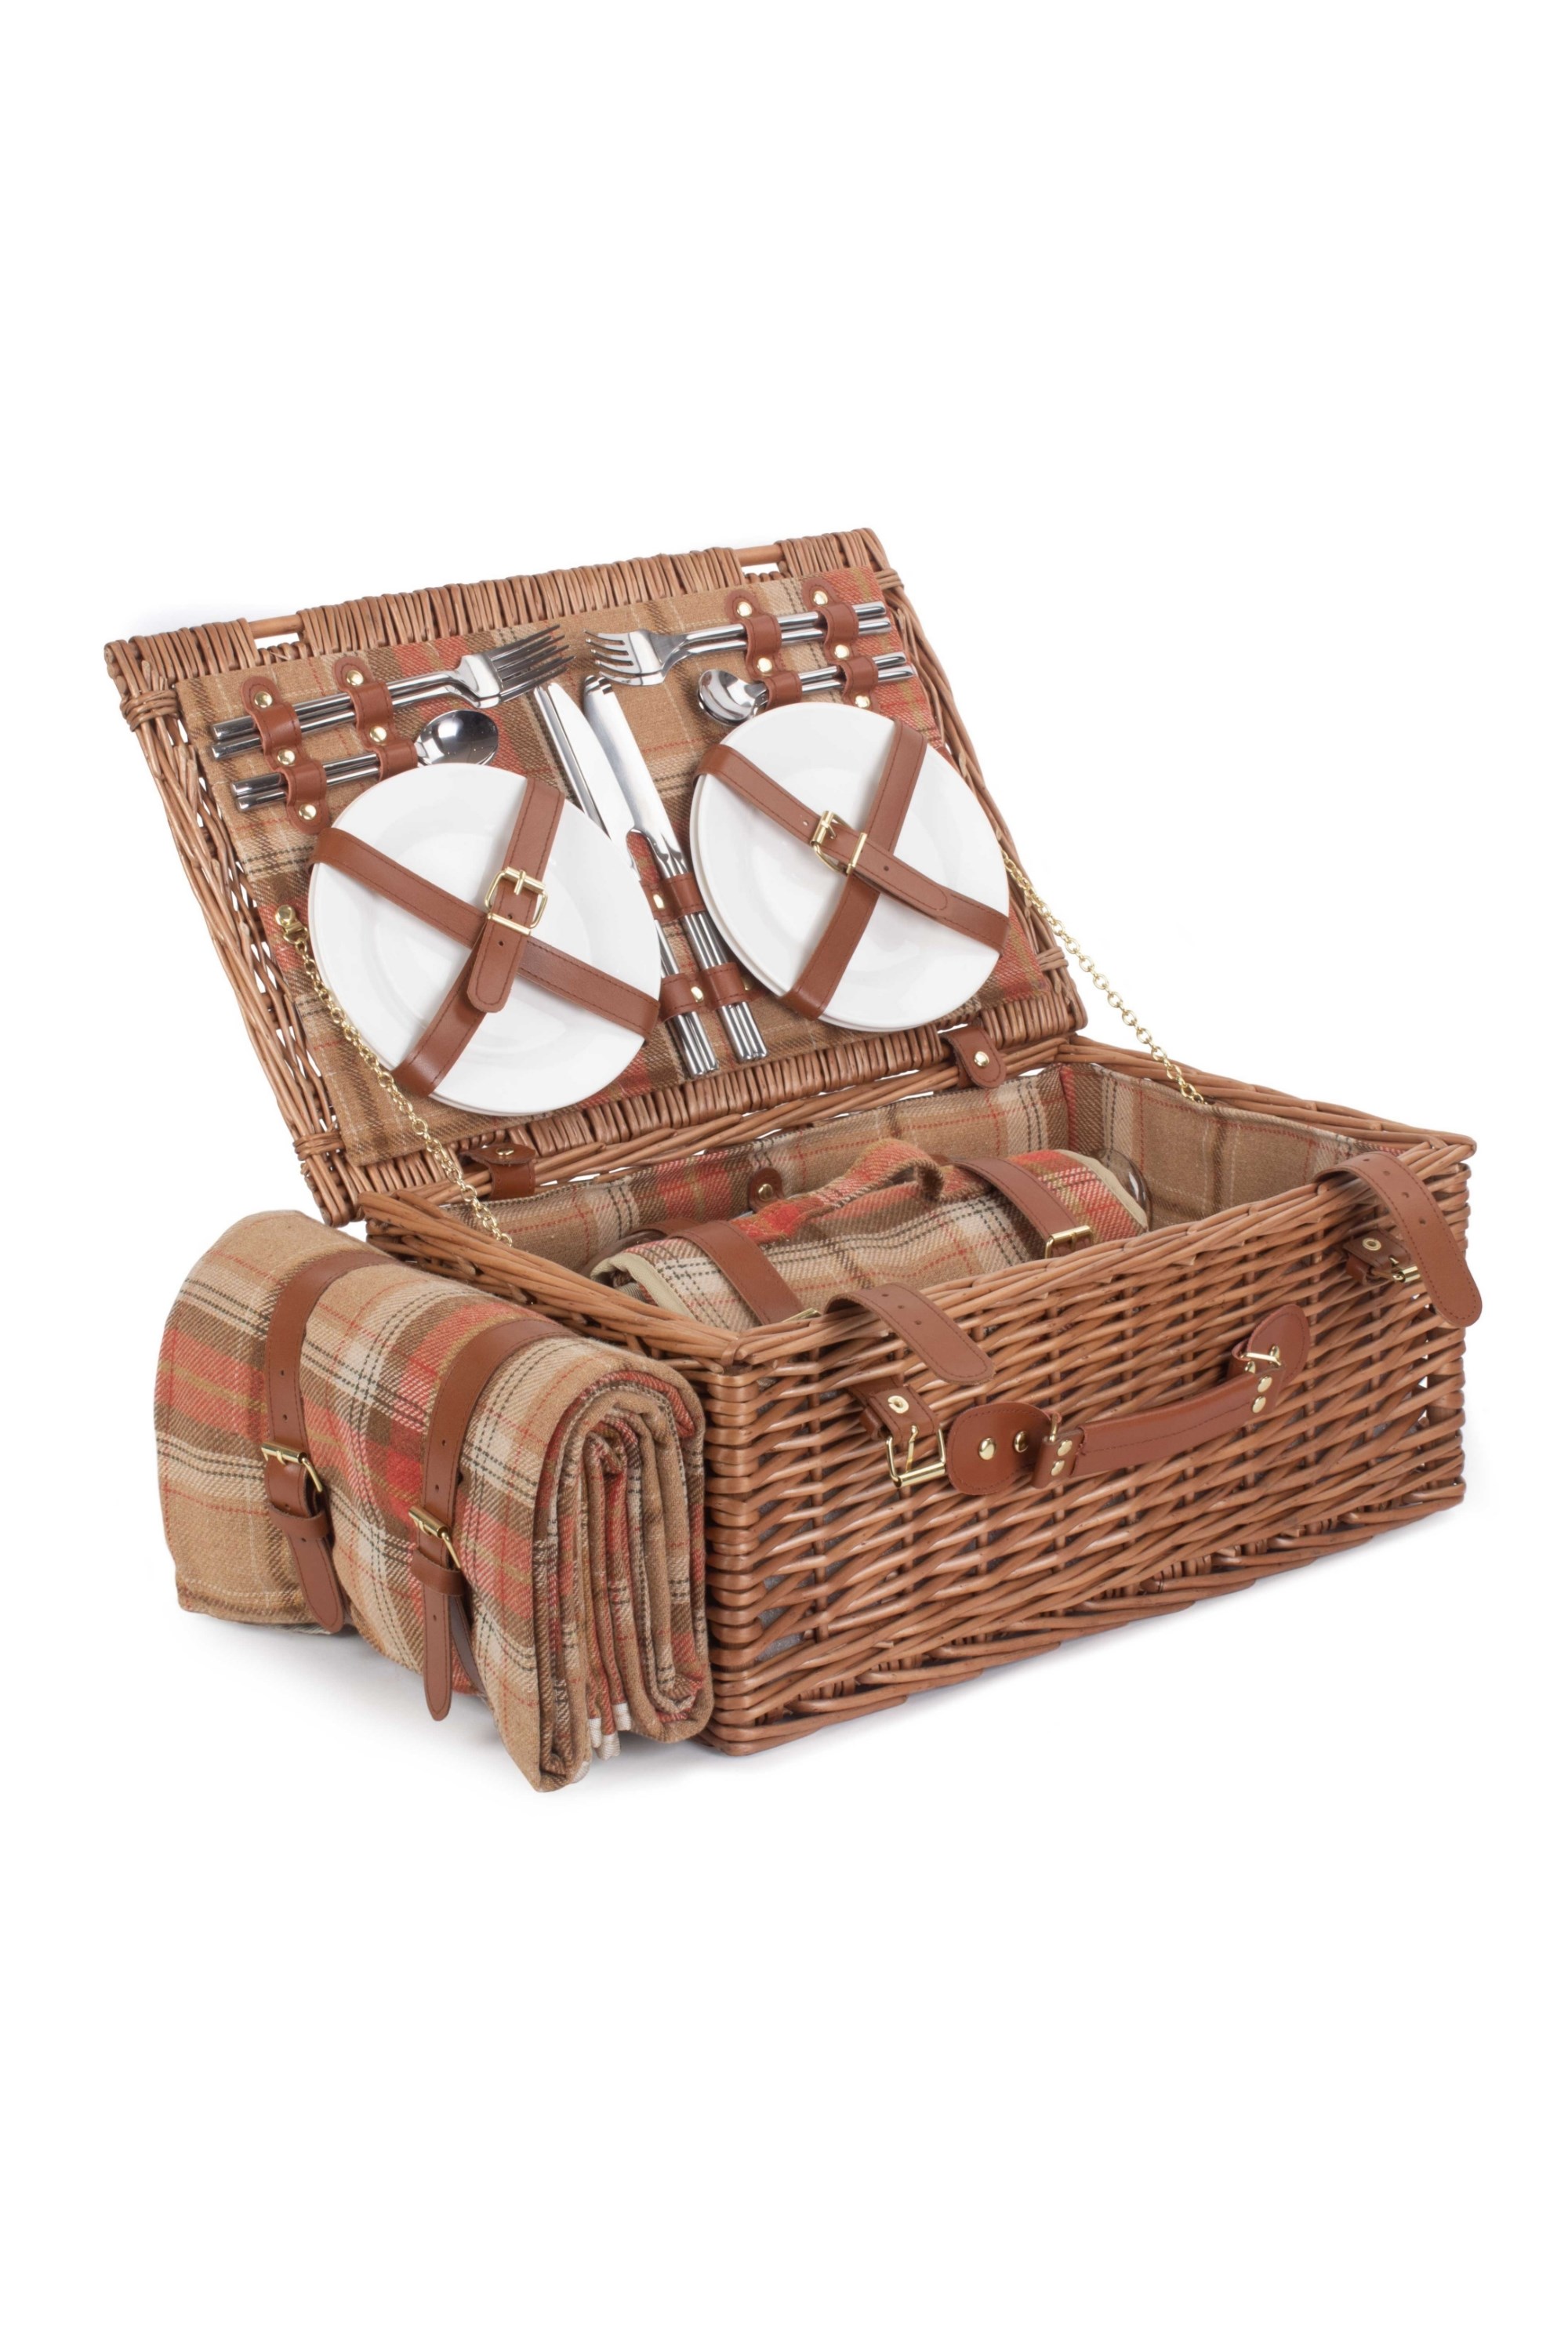 Autumn Red 4 Person Fitted Picnic Basket -